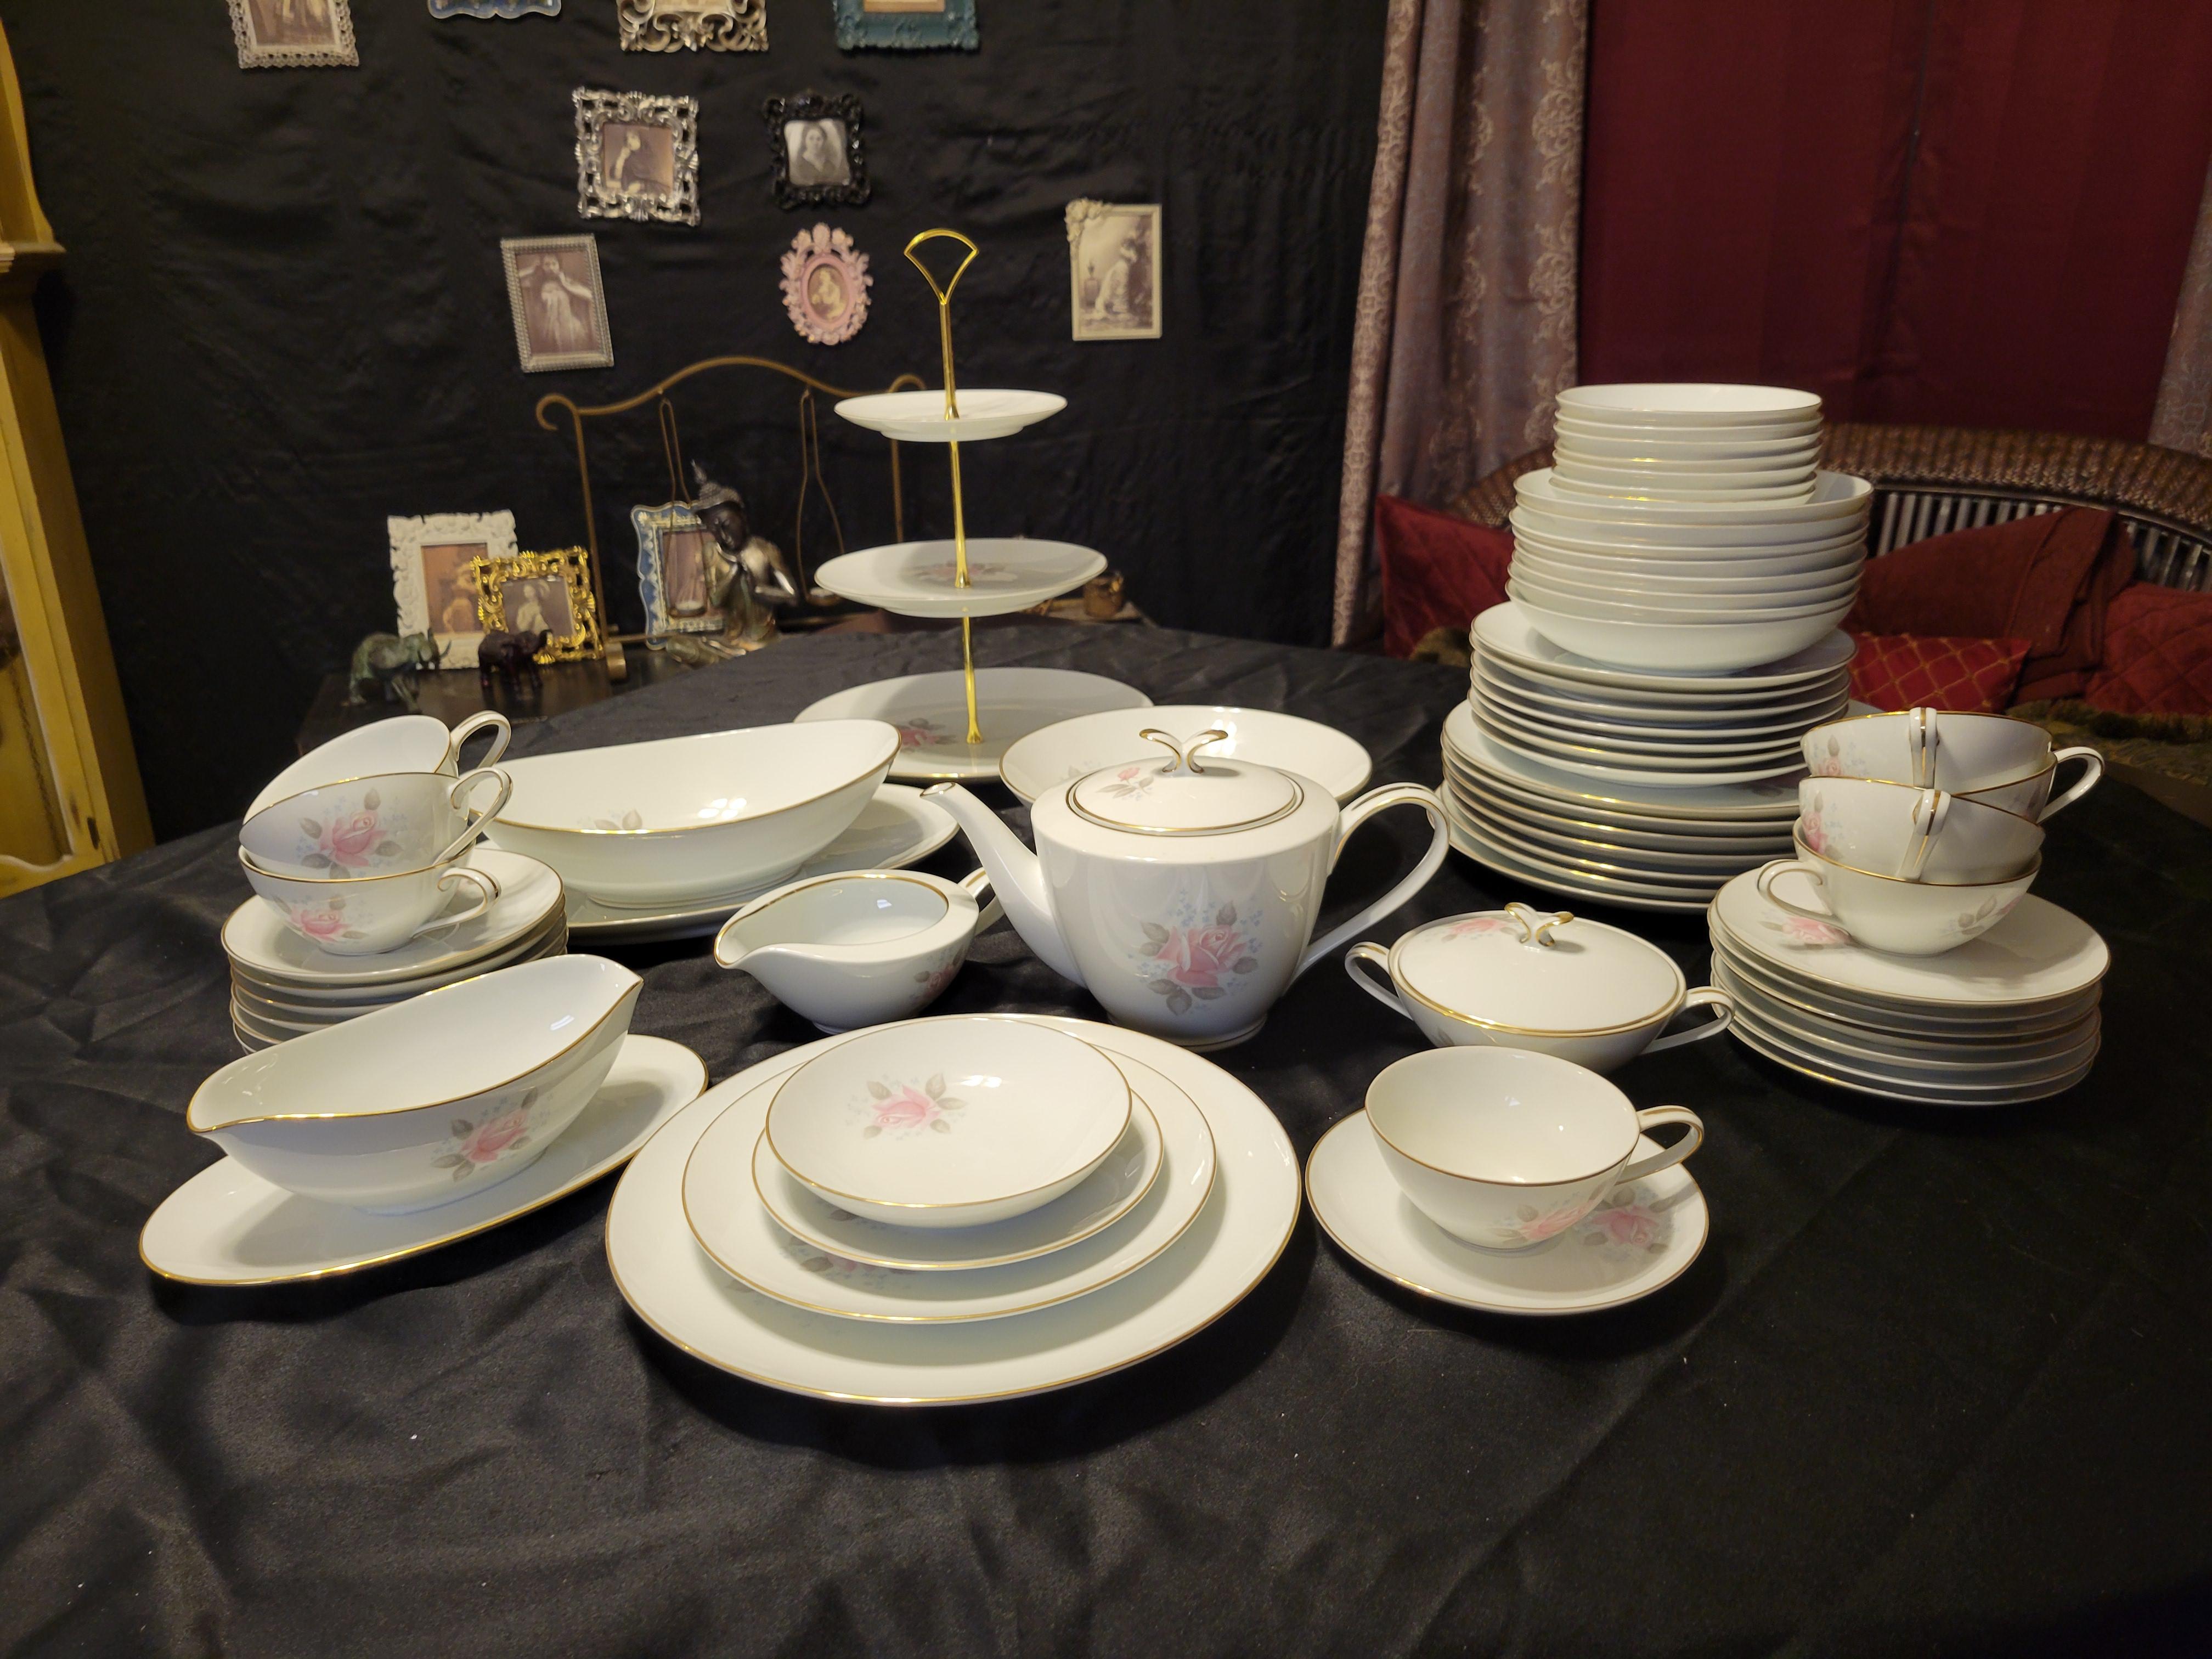 Vintage Noritake 'Roseville' Fine China Dining Set for 8 Persons - 79 Items In Excellent Condition For Sale In Phoenix, AZ